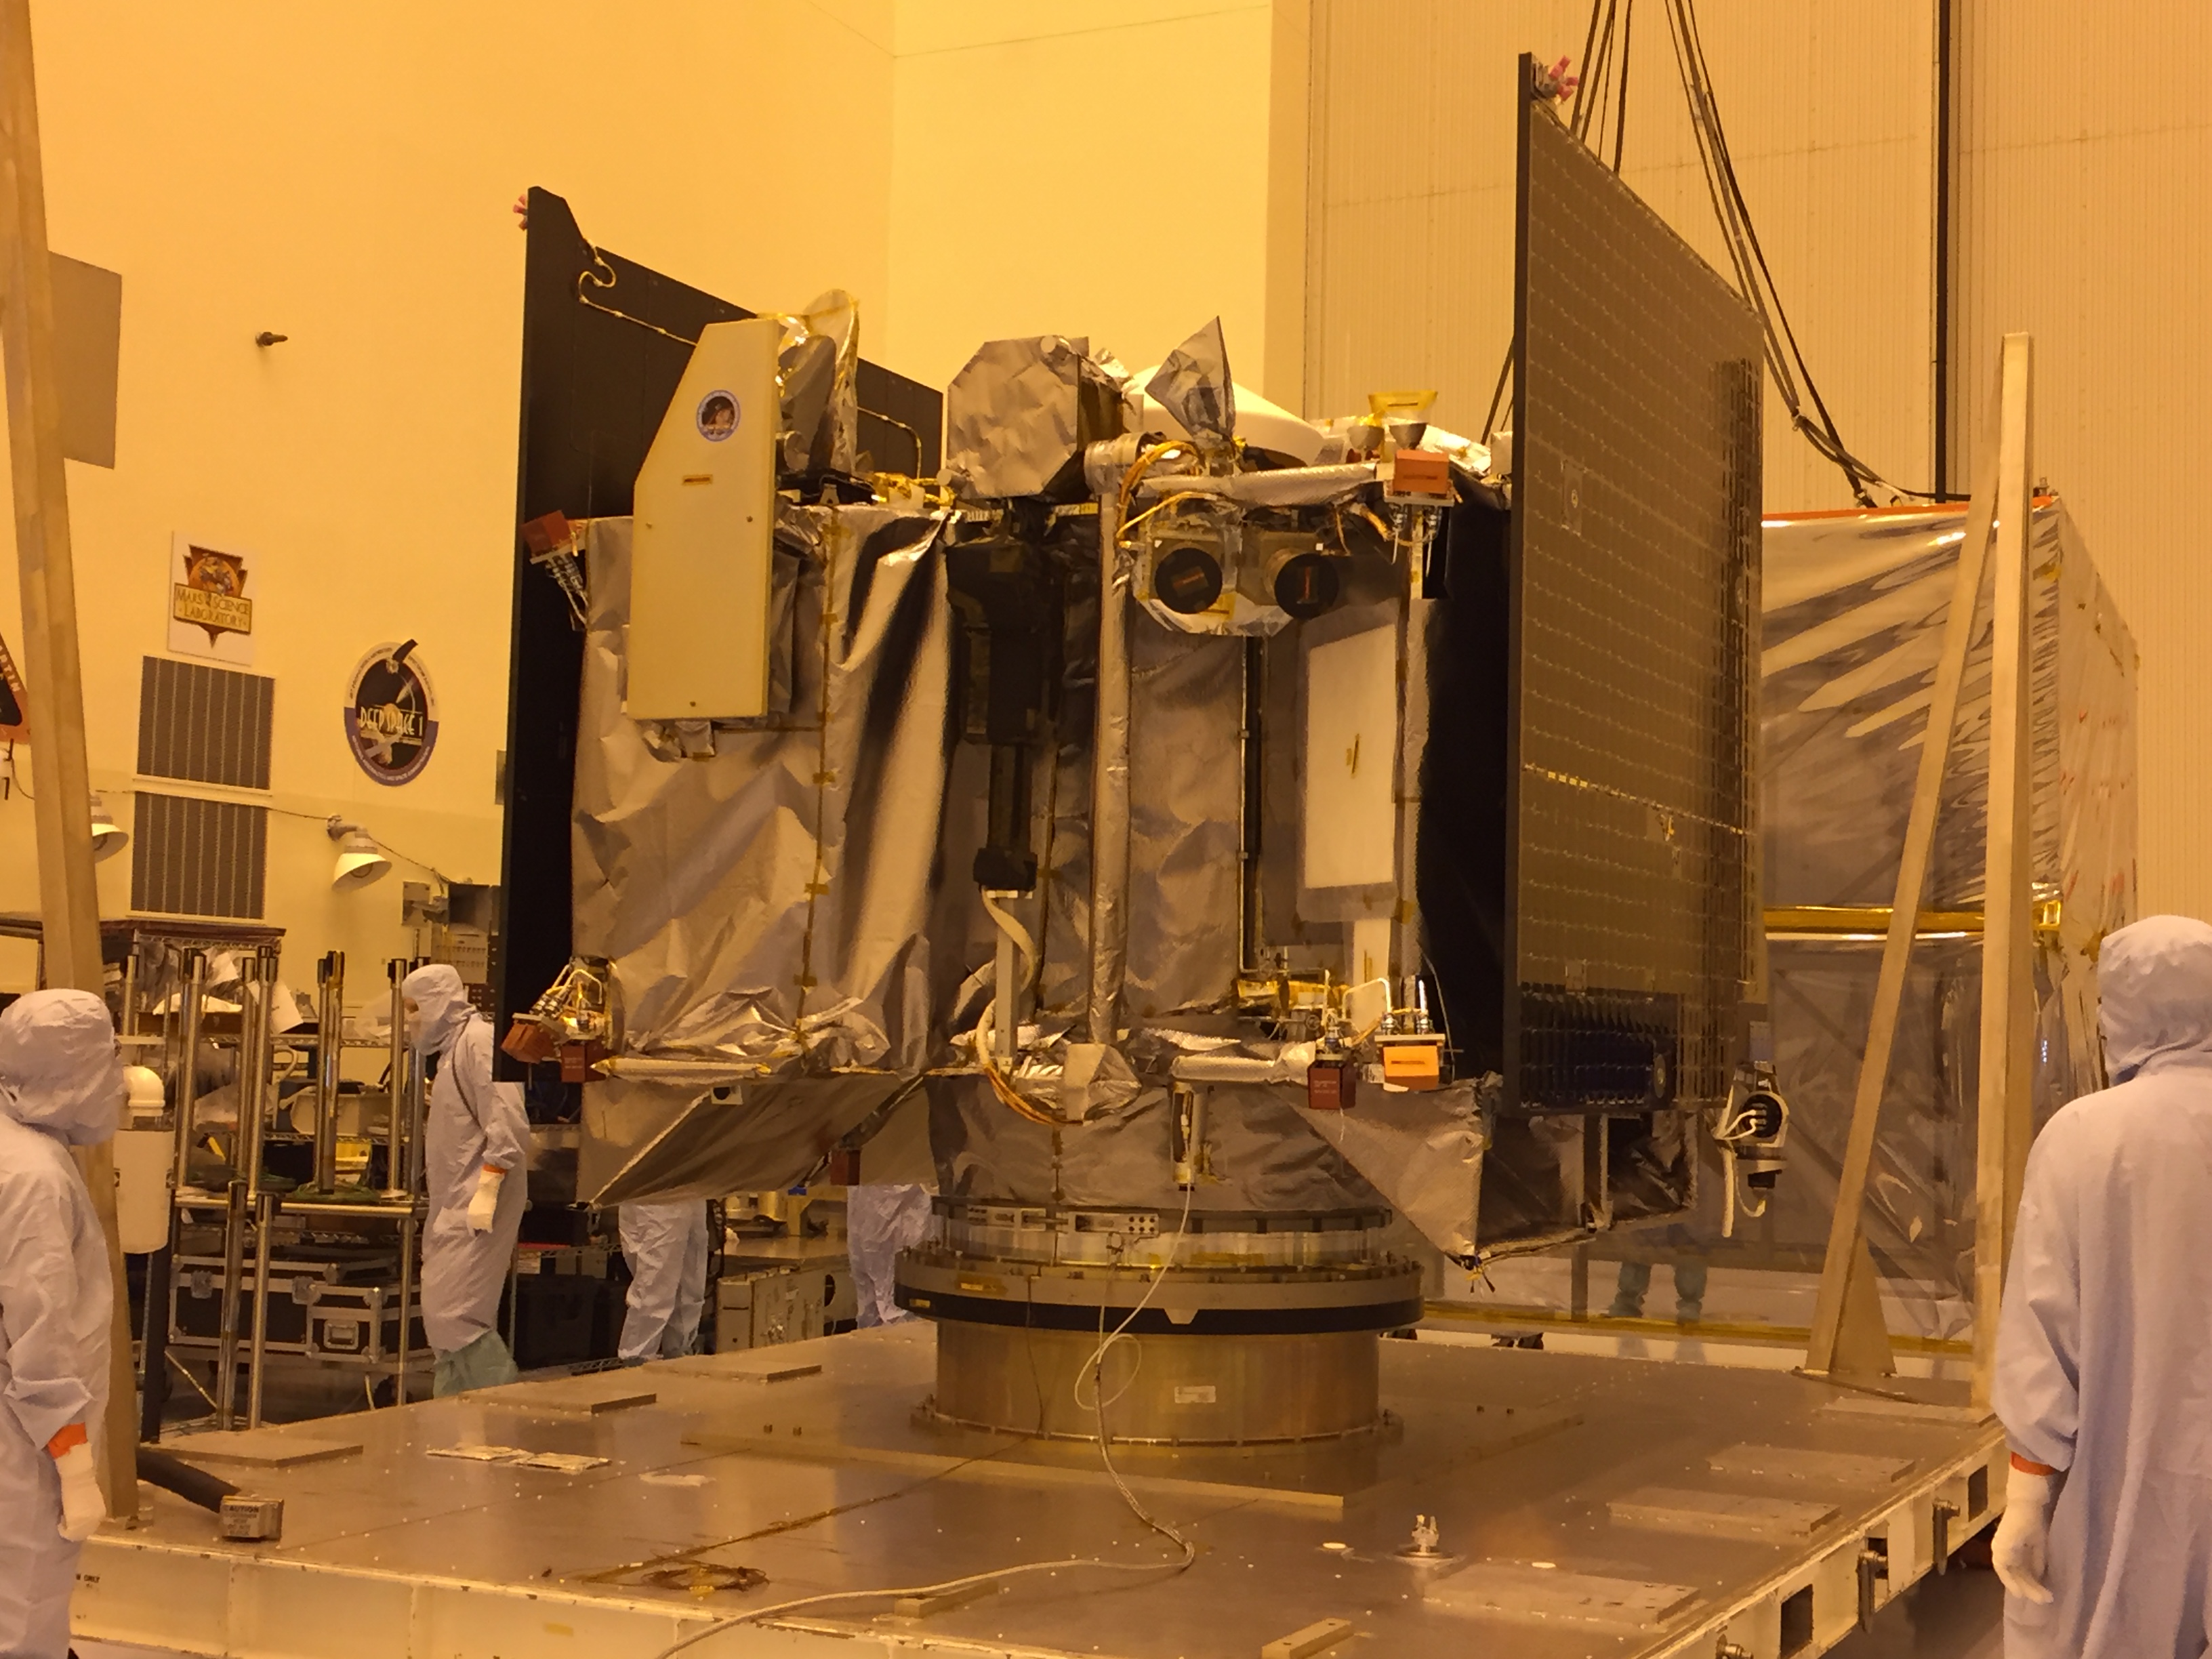 After arriving at NASA’s Kennedy Space Center, the OSIRIS-REx spacecraft sits on a launch vehicle adapter ring in the Payload Hazardous Servicing Facility. Credit: University of Arizona/Erin Morton